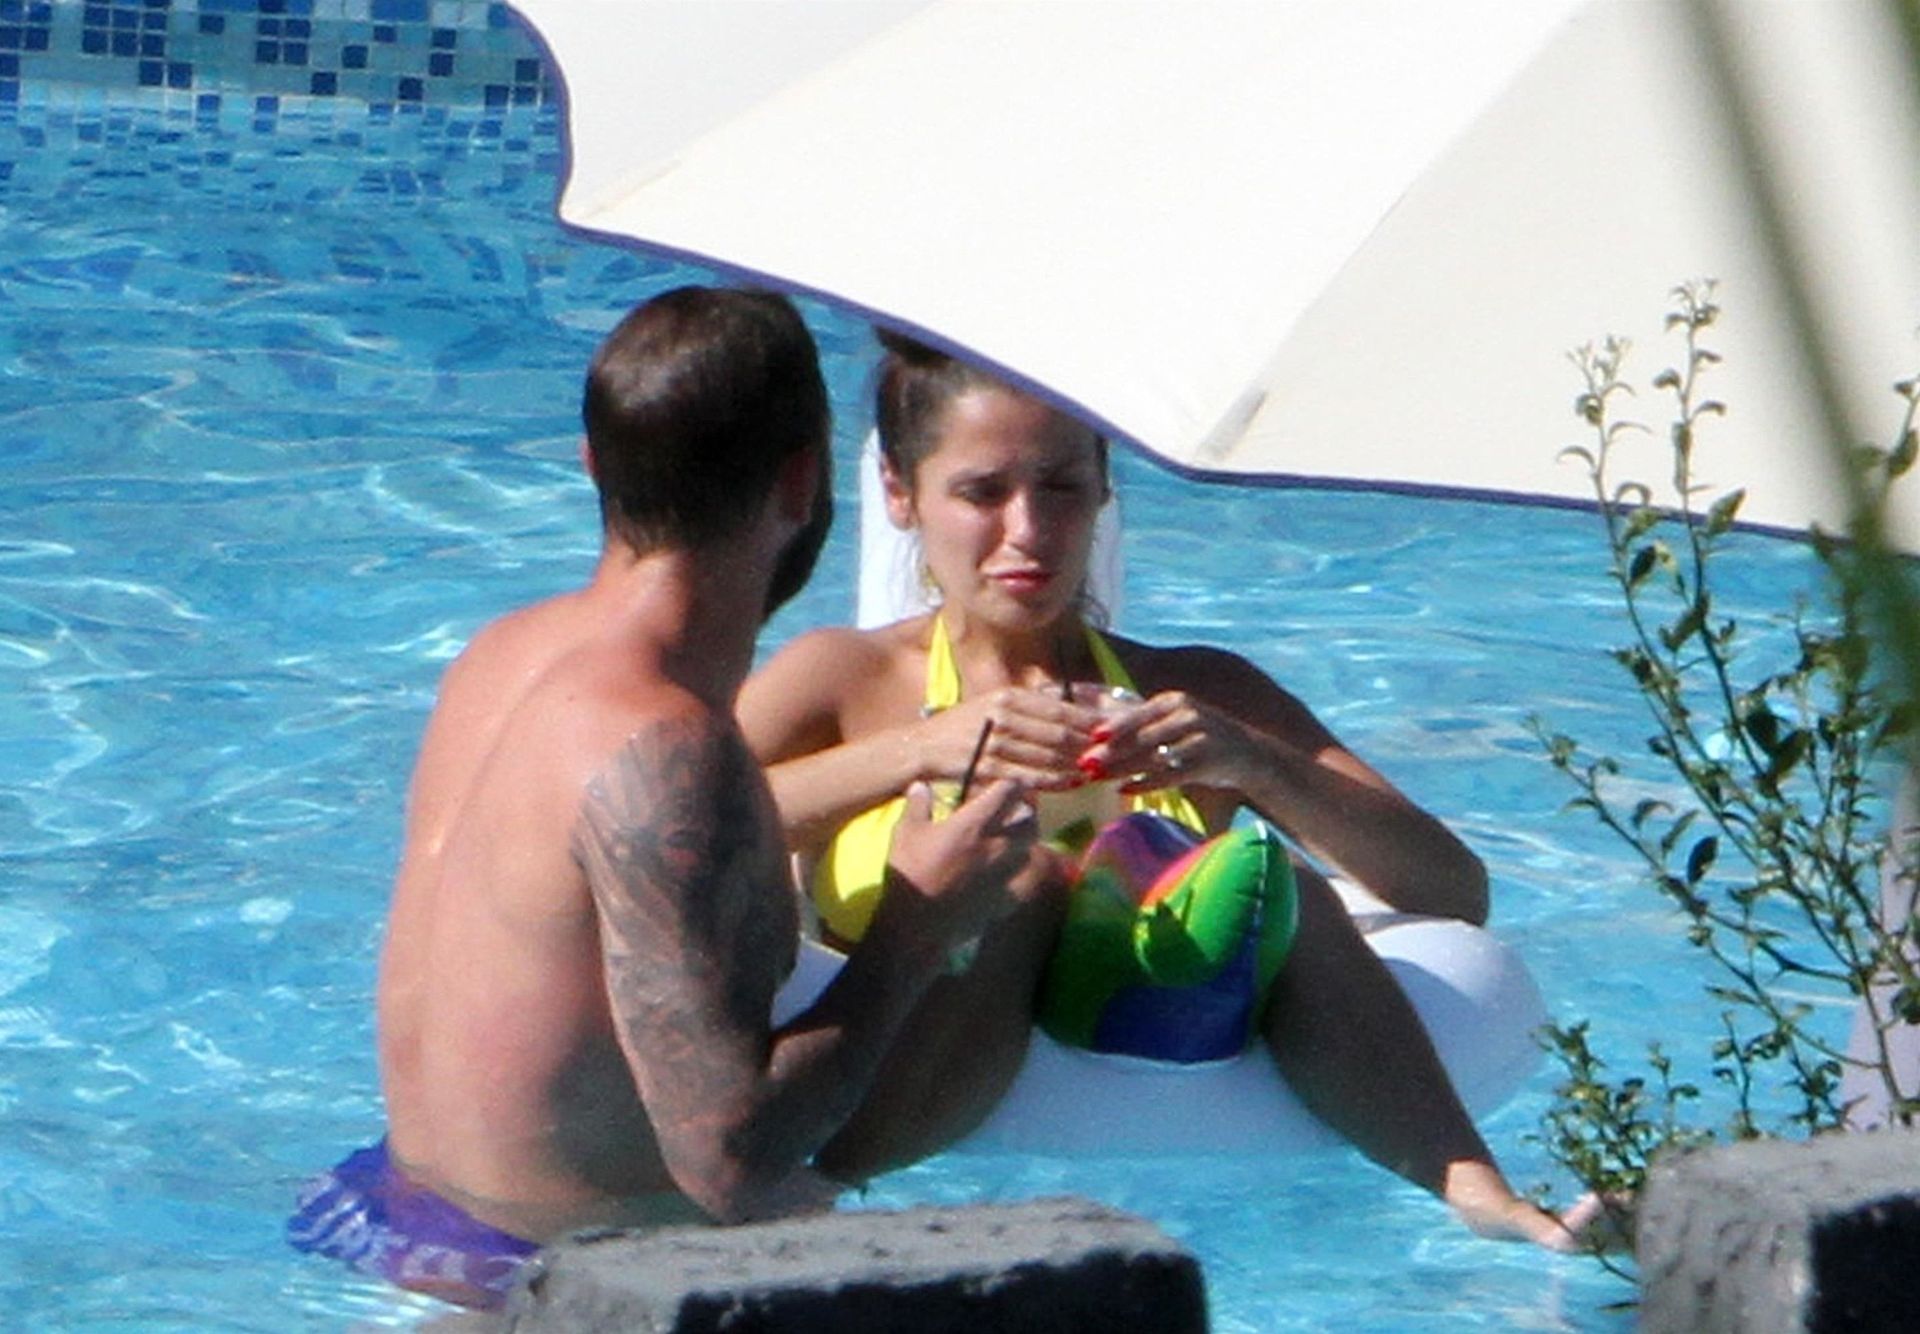 Oliver Kragl & Alessia Macari Relax Poolside in Benevento (33 Photos)